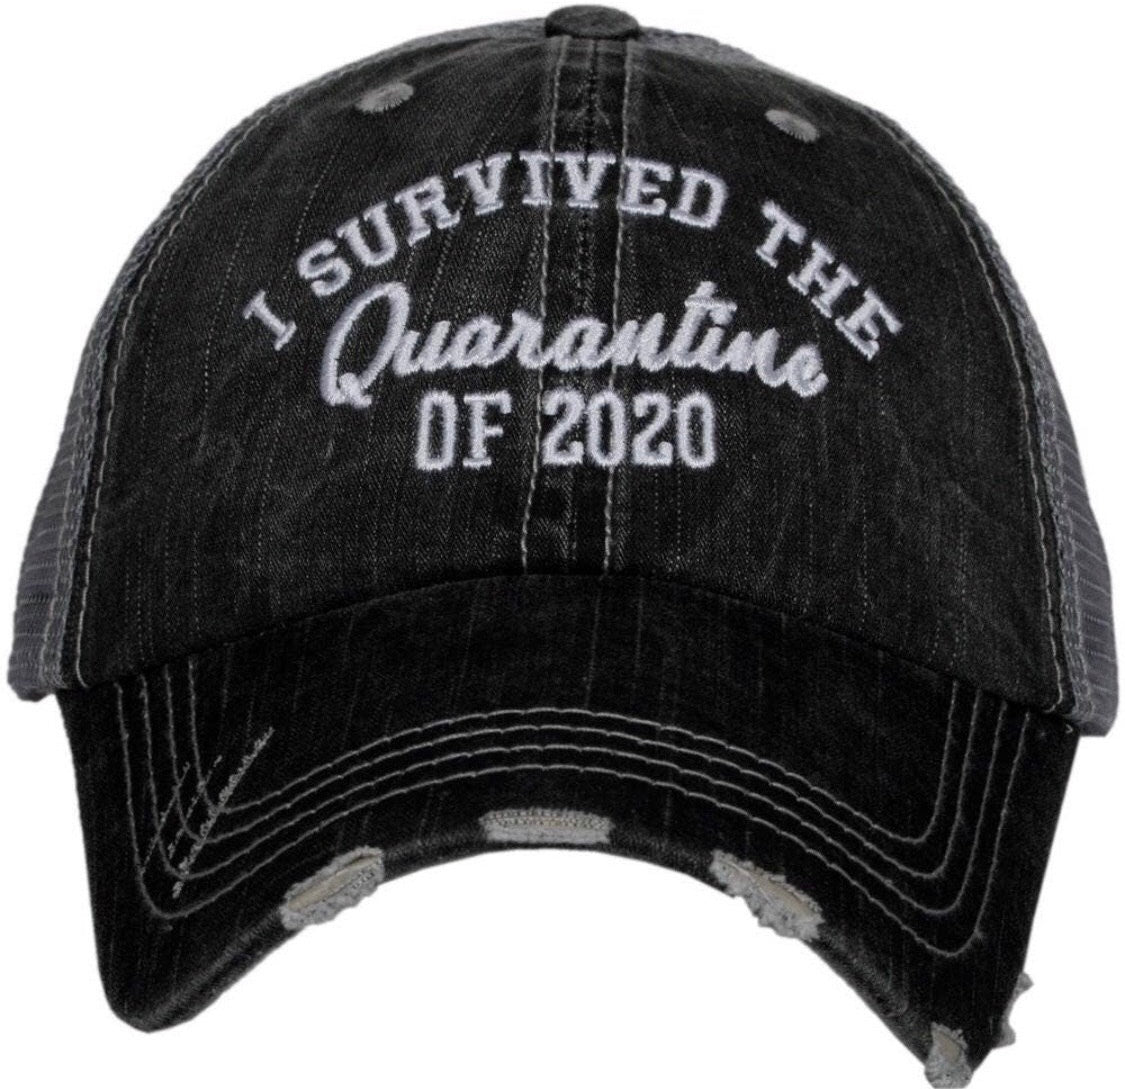 I Survived The Quarantine of 2020 - Wholesale Trucker Hat